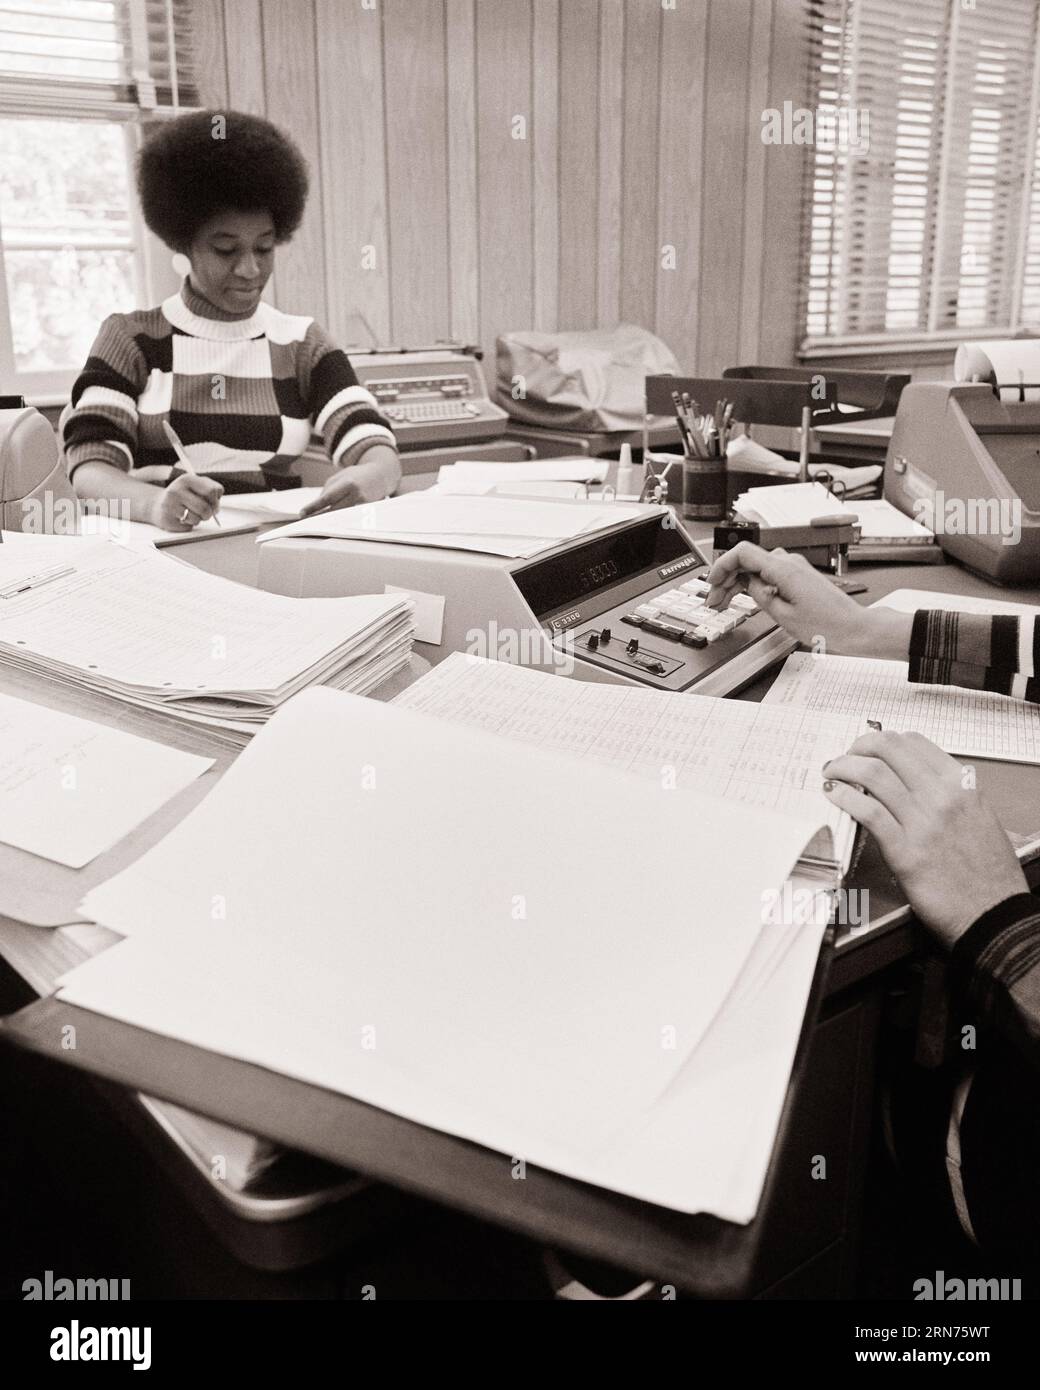 1970s AFRICAN AMERICAN WOMAN WITH AFRO HAIRSTYLE WORKING IN AN ACCOUNTING OFFICE CAUCASIAN HANDS USING AN ELECTRIC CALCULATOR  - o4052 HAR001 HARS B&W GOALS AFRICAN-AMERICANS AFRICAN-AMERICAN HAIRSTYLE LOW ANGLE ADDING MACHINE CLERKS BOOKKEEPER BLACK ETHNICITY OFFICE WORKER OCCUPATIONS USING GAL FRIDAY ACCOUNTING ADMINISTRATOR CALCULATORS SECRETARIES SUPPORT AMANUENSIS BOOKKEEPING COOPERATION MID-ADULT MID-ADULT WOMAN TOGETHERNESS BLACK AND WHITE CAUCASIAN ETHNICITY CLERICAL HANDS ONLY HAR001 OLD FASHIONED AFRICAN AMERICANS Stock Photo